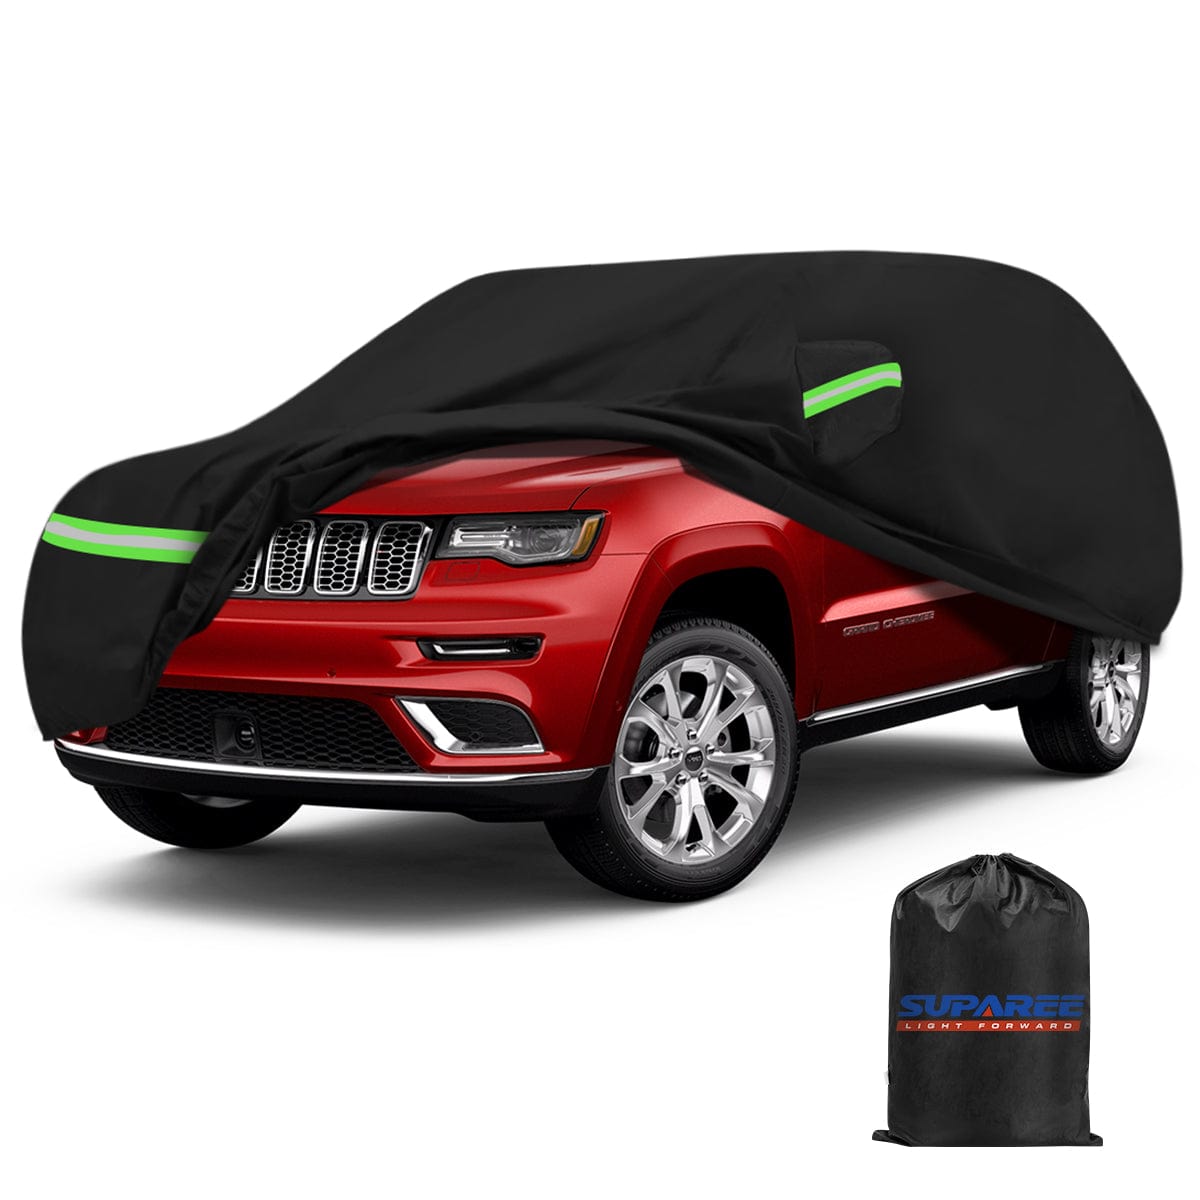 SUPAREE Jeep Cover Suparee Jeep Rain Cover Windproof for 2011-2022 Grand Cherokee Product description